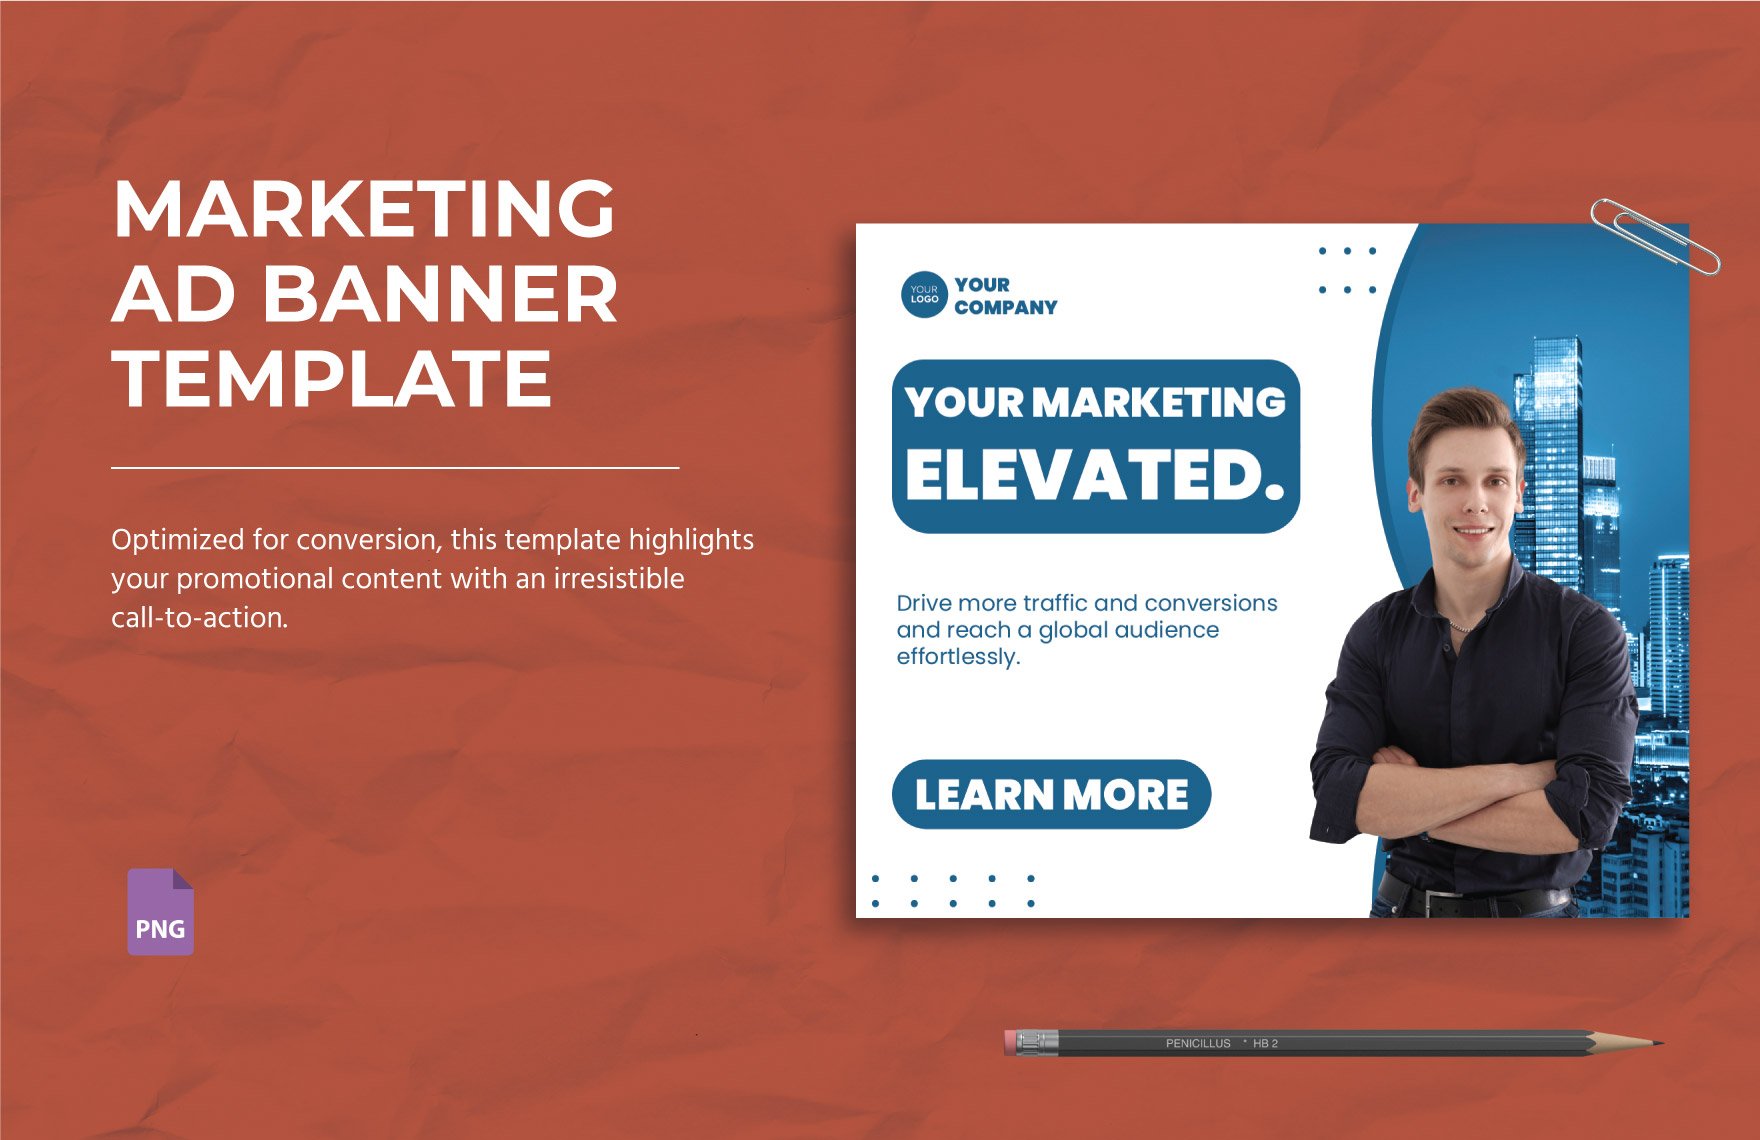 Marketing Ad Banner Template in PNG